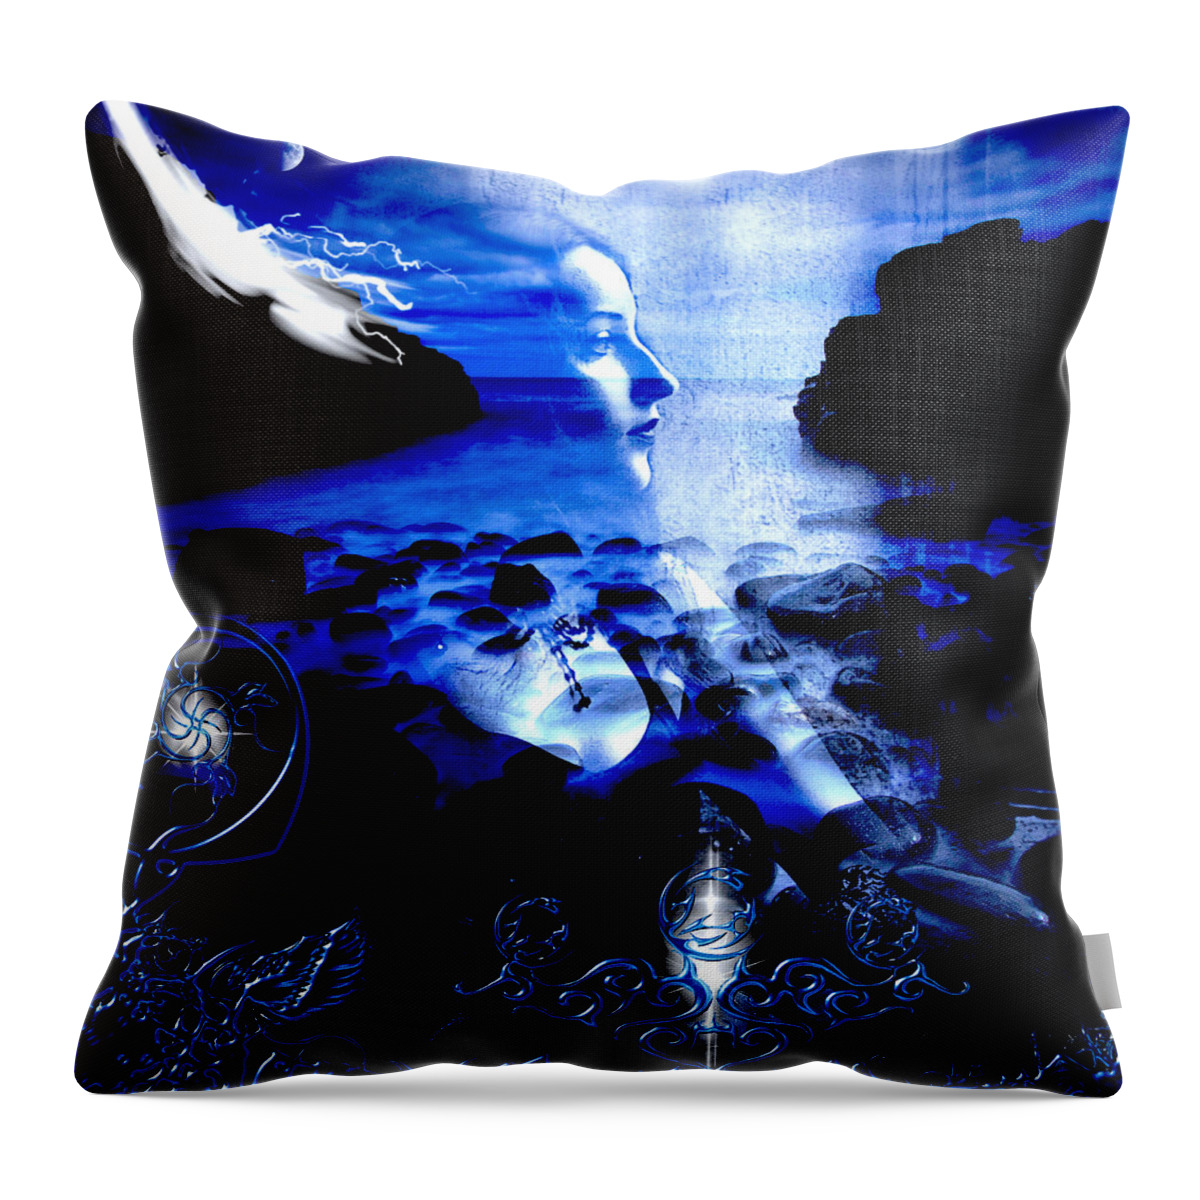 Blues Throw Pillow featuring the digital art Chasing The Blues by Michael Damiani